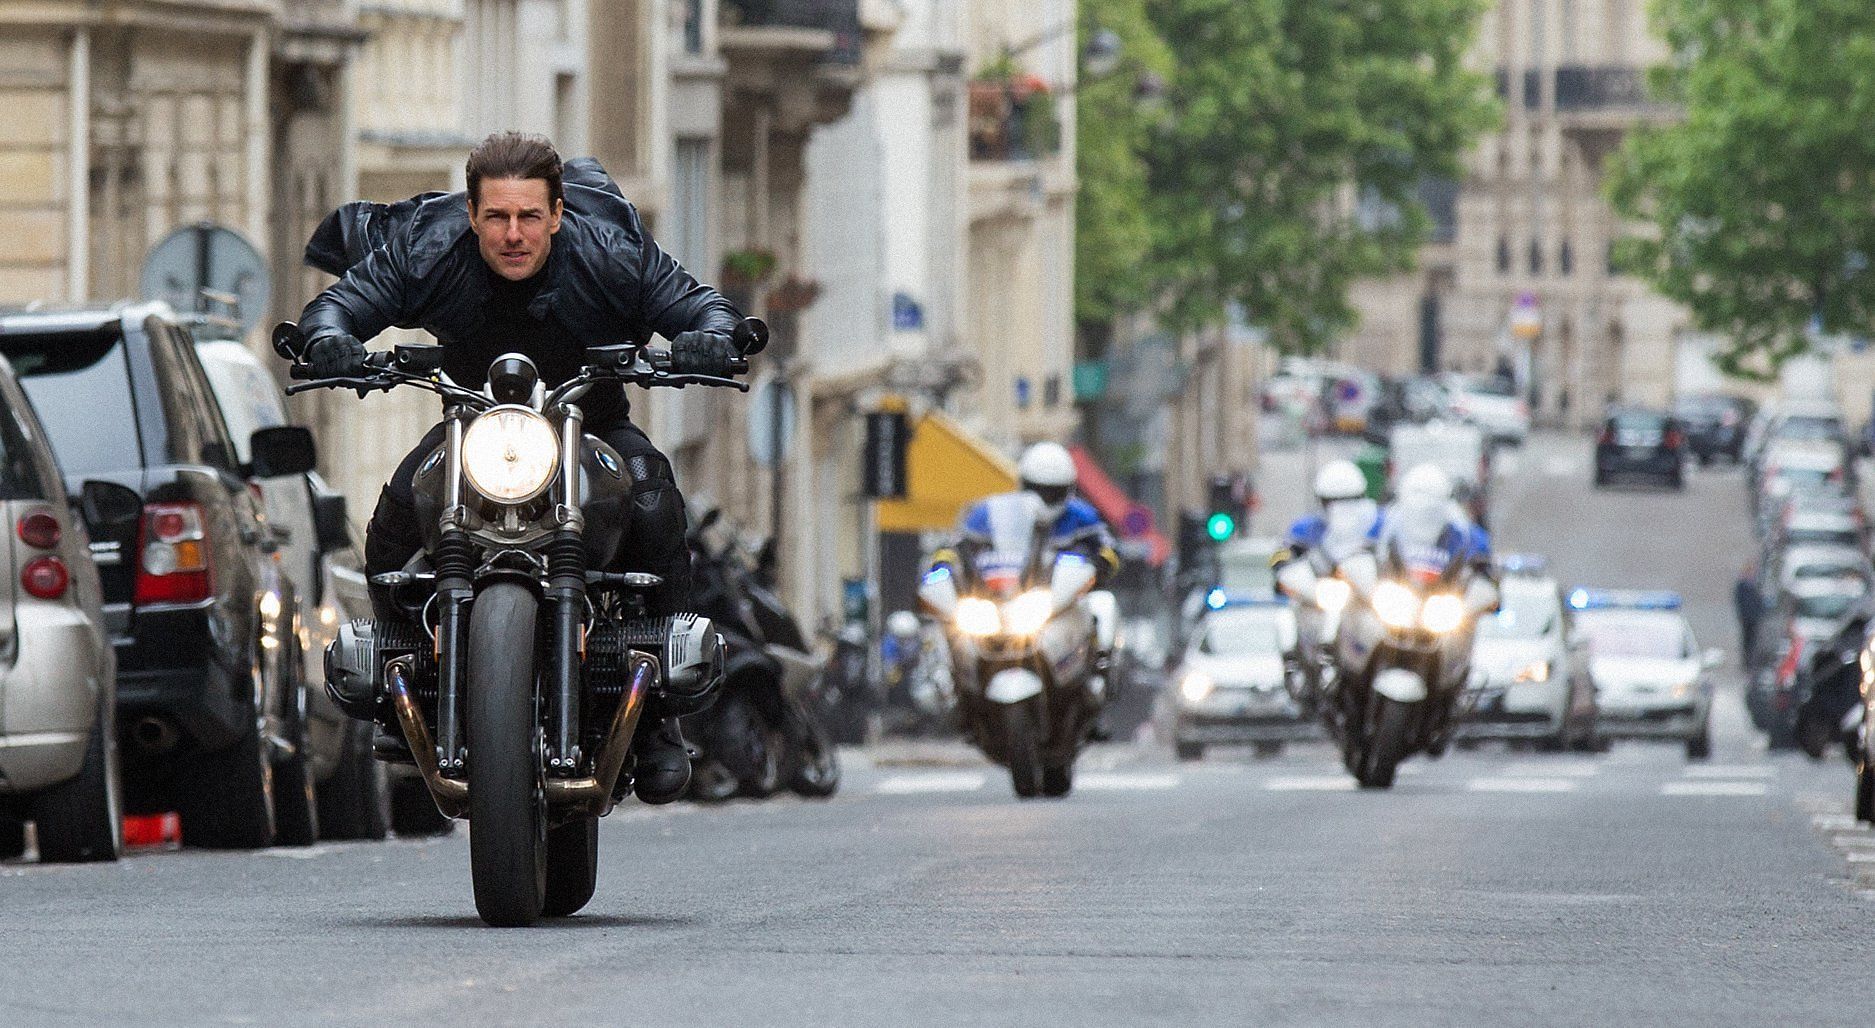 Mission: Impossible - Fallout (Image via Facebook/@Mission: Impossible)